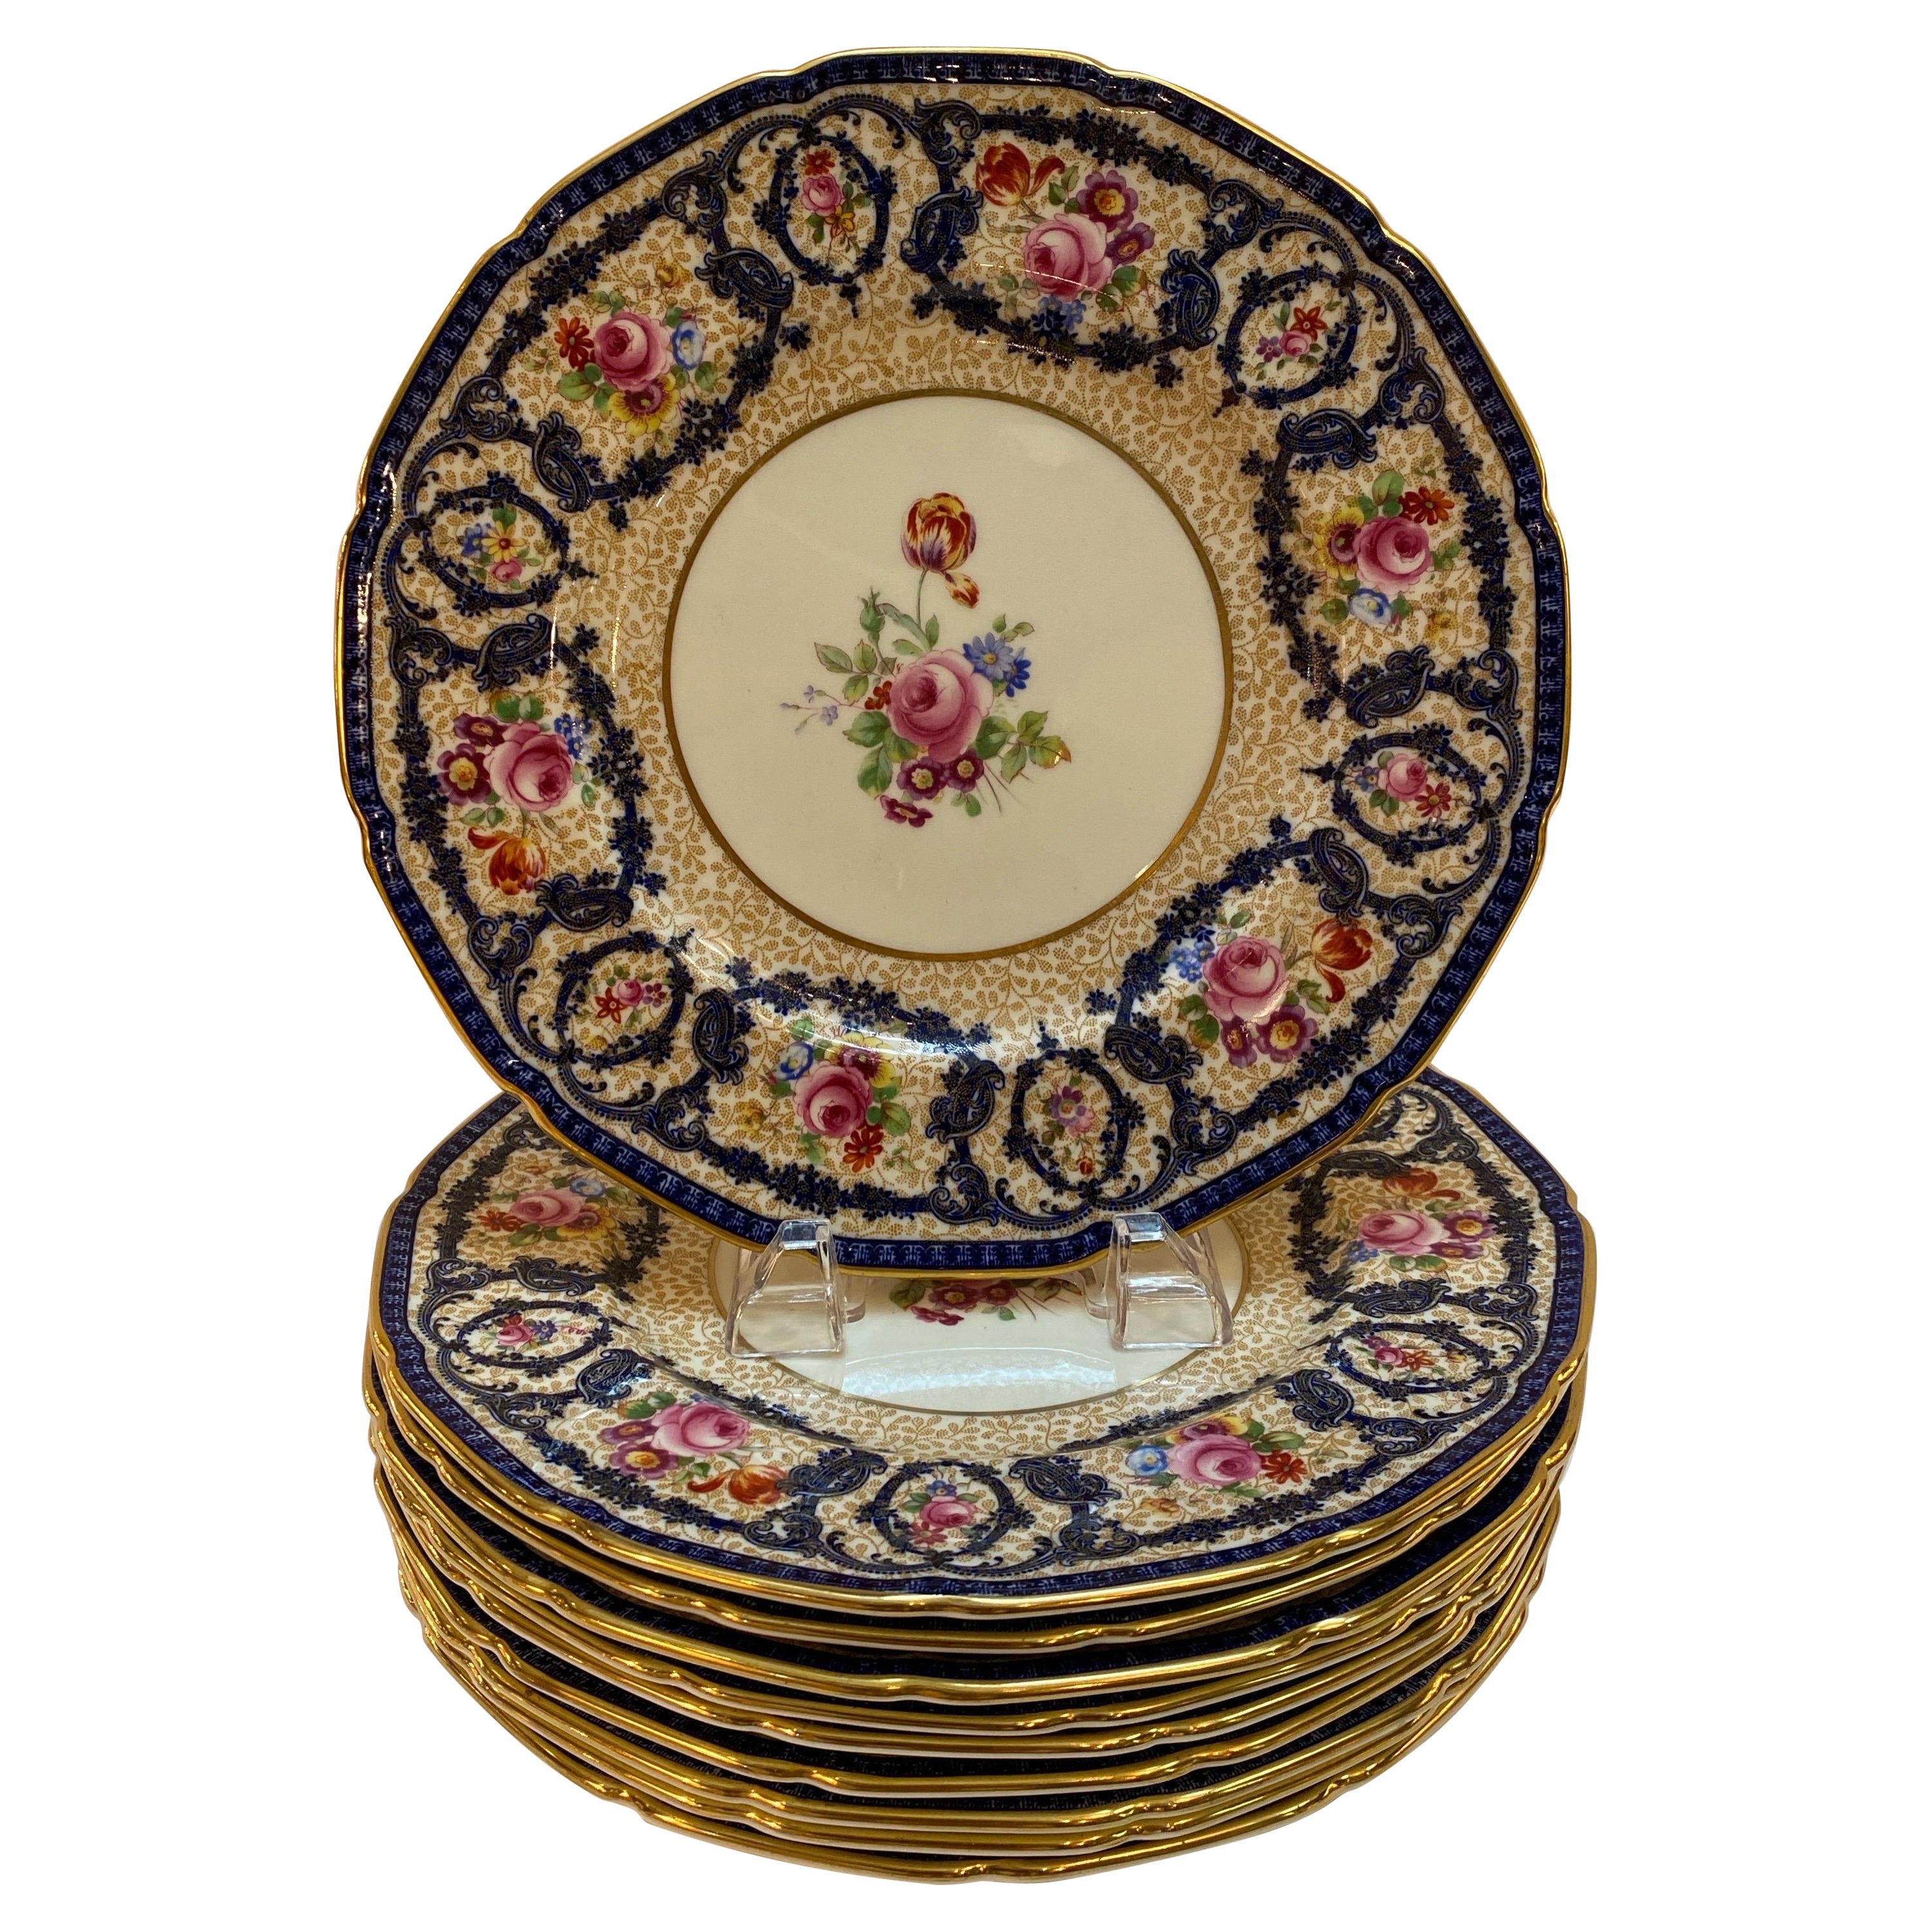 A Set of 10 Hand Painted Antique Service Plates by Royal Doulton Circa 1915 For Sale